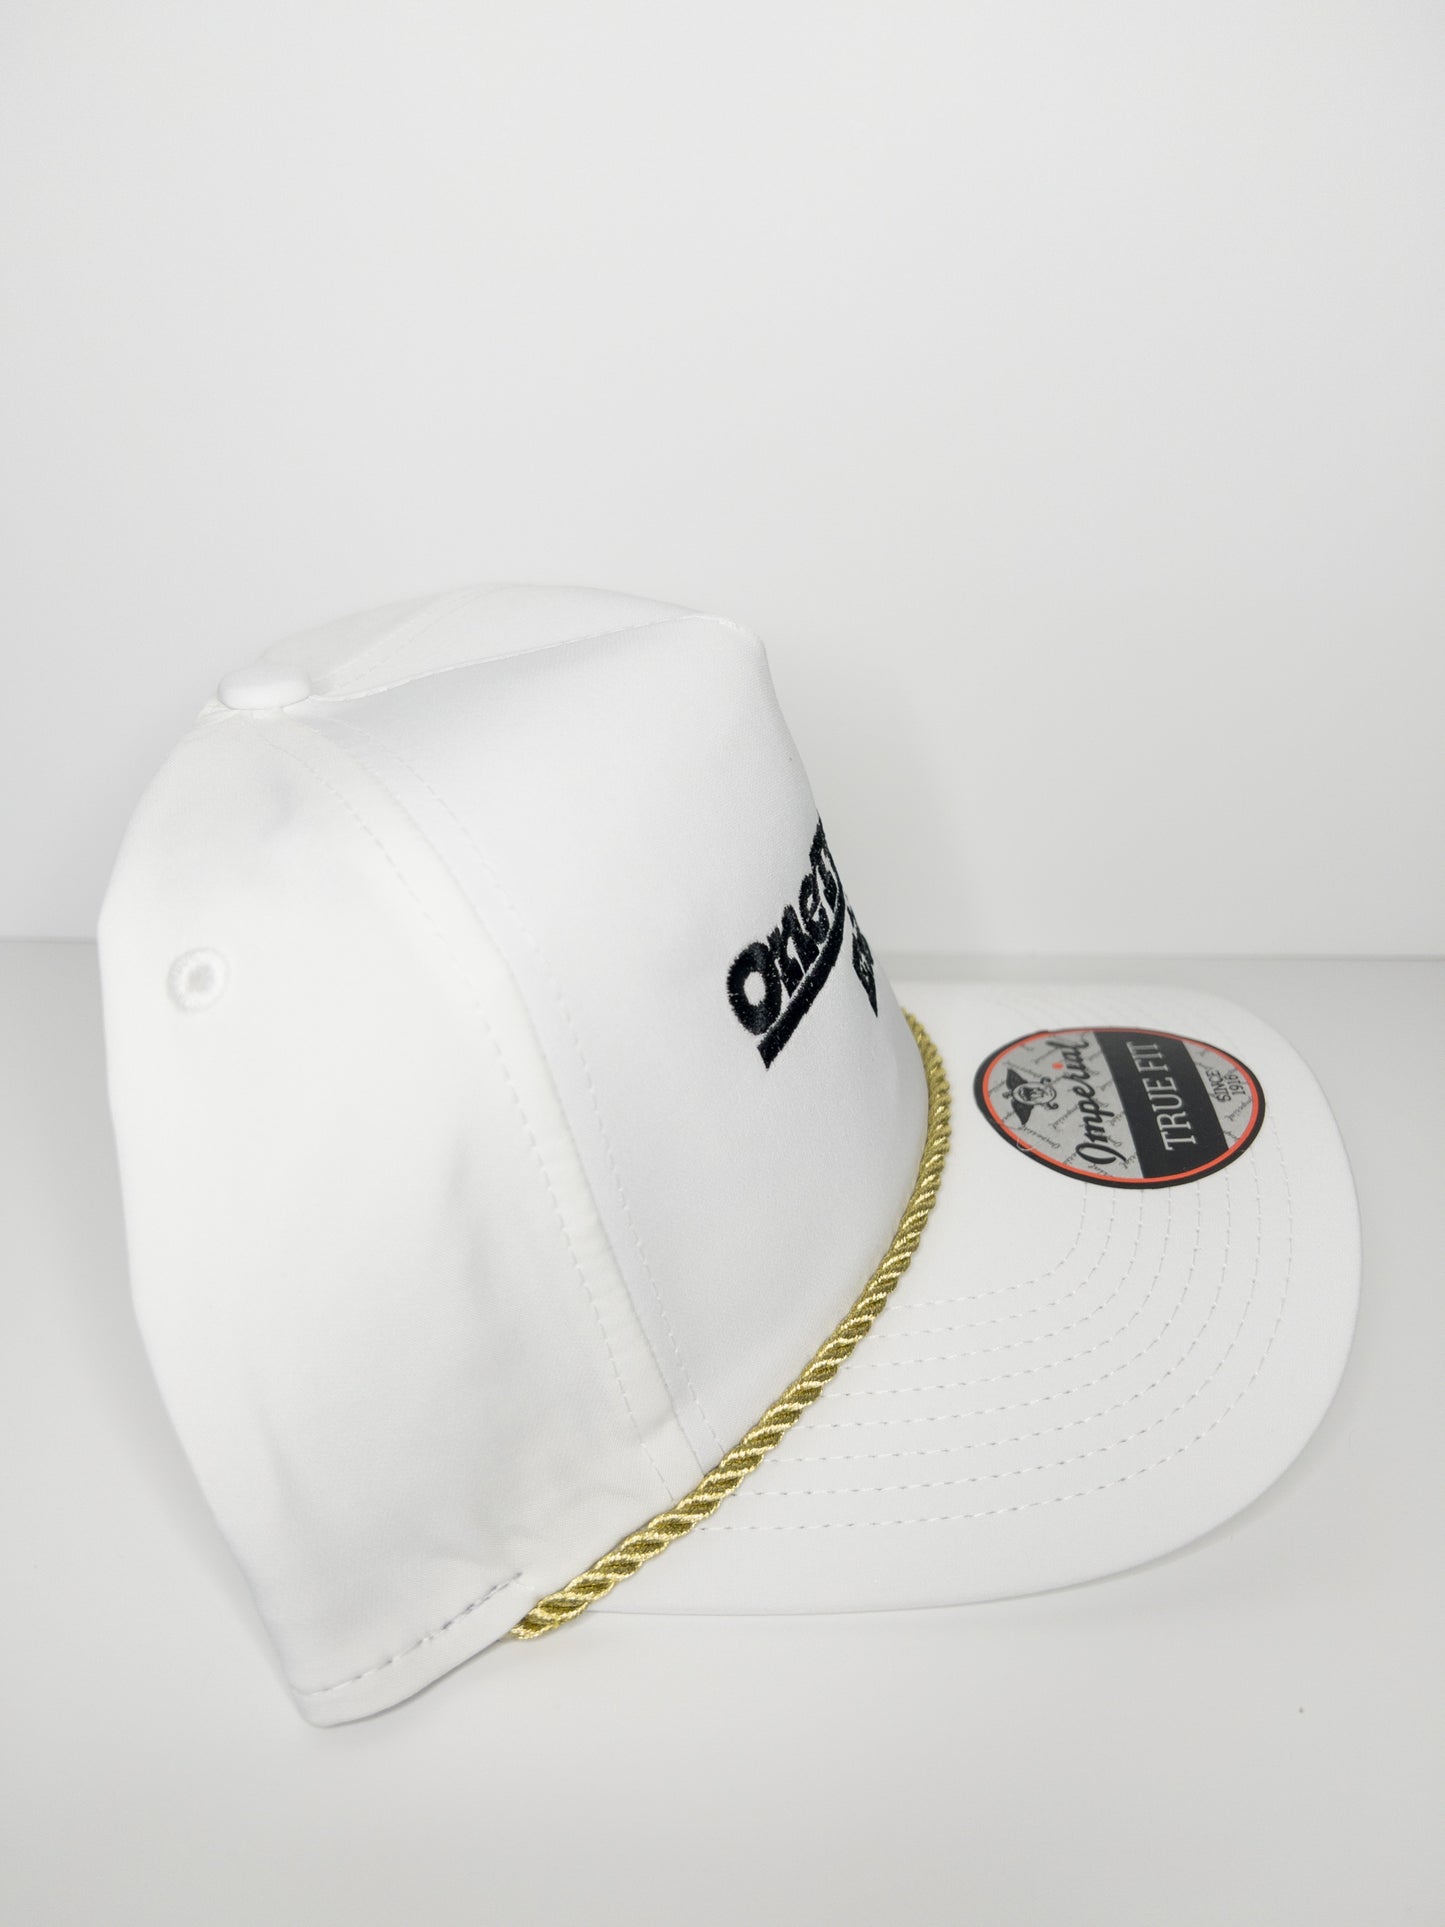 OneTwenty Over Eighty Rope Hat - Gold/Black